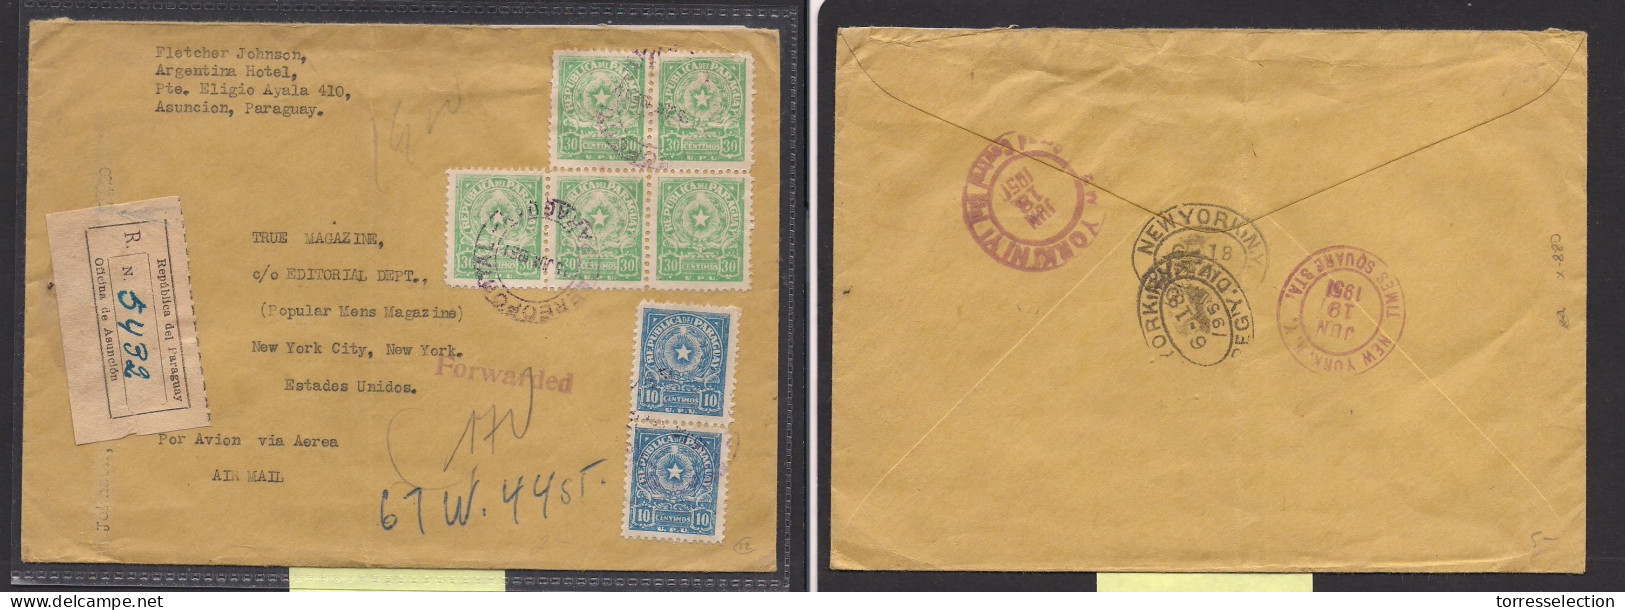 PARAGUAY. Paraguay - Cover - 1951 Asuncion To USA NYC Register Mult Fkd Env, Fwded, Fine. Easy Deal. XSALE. - Paraguay